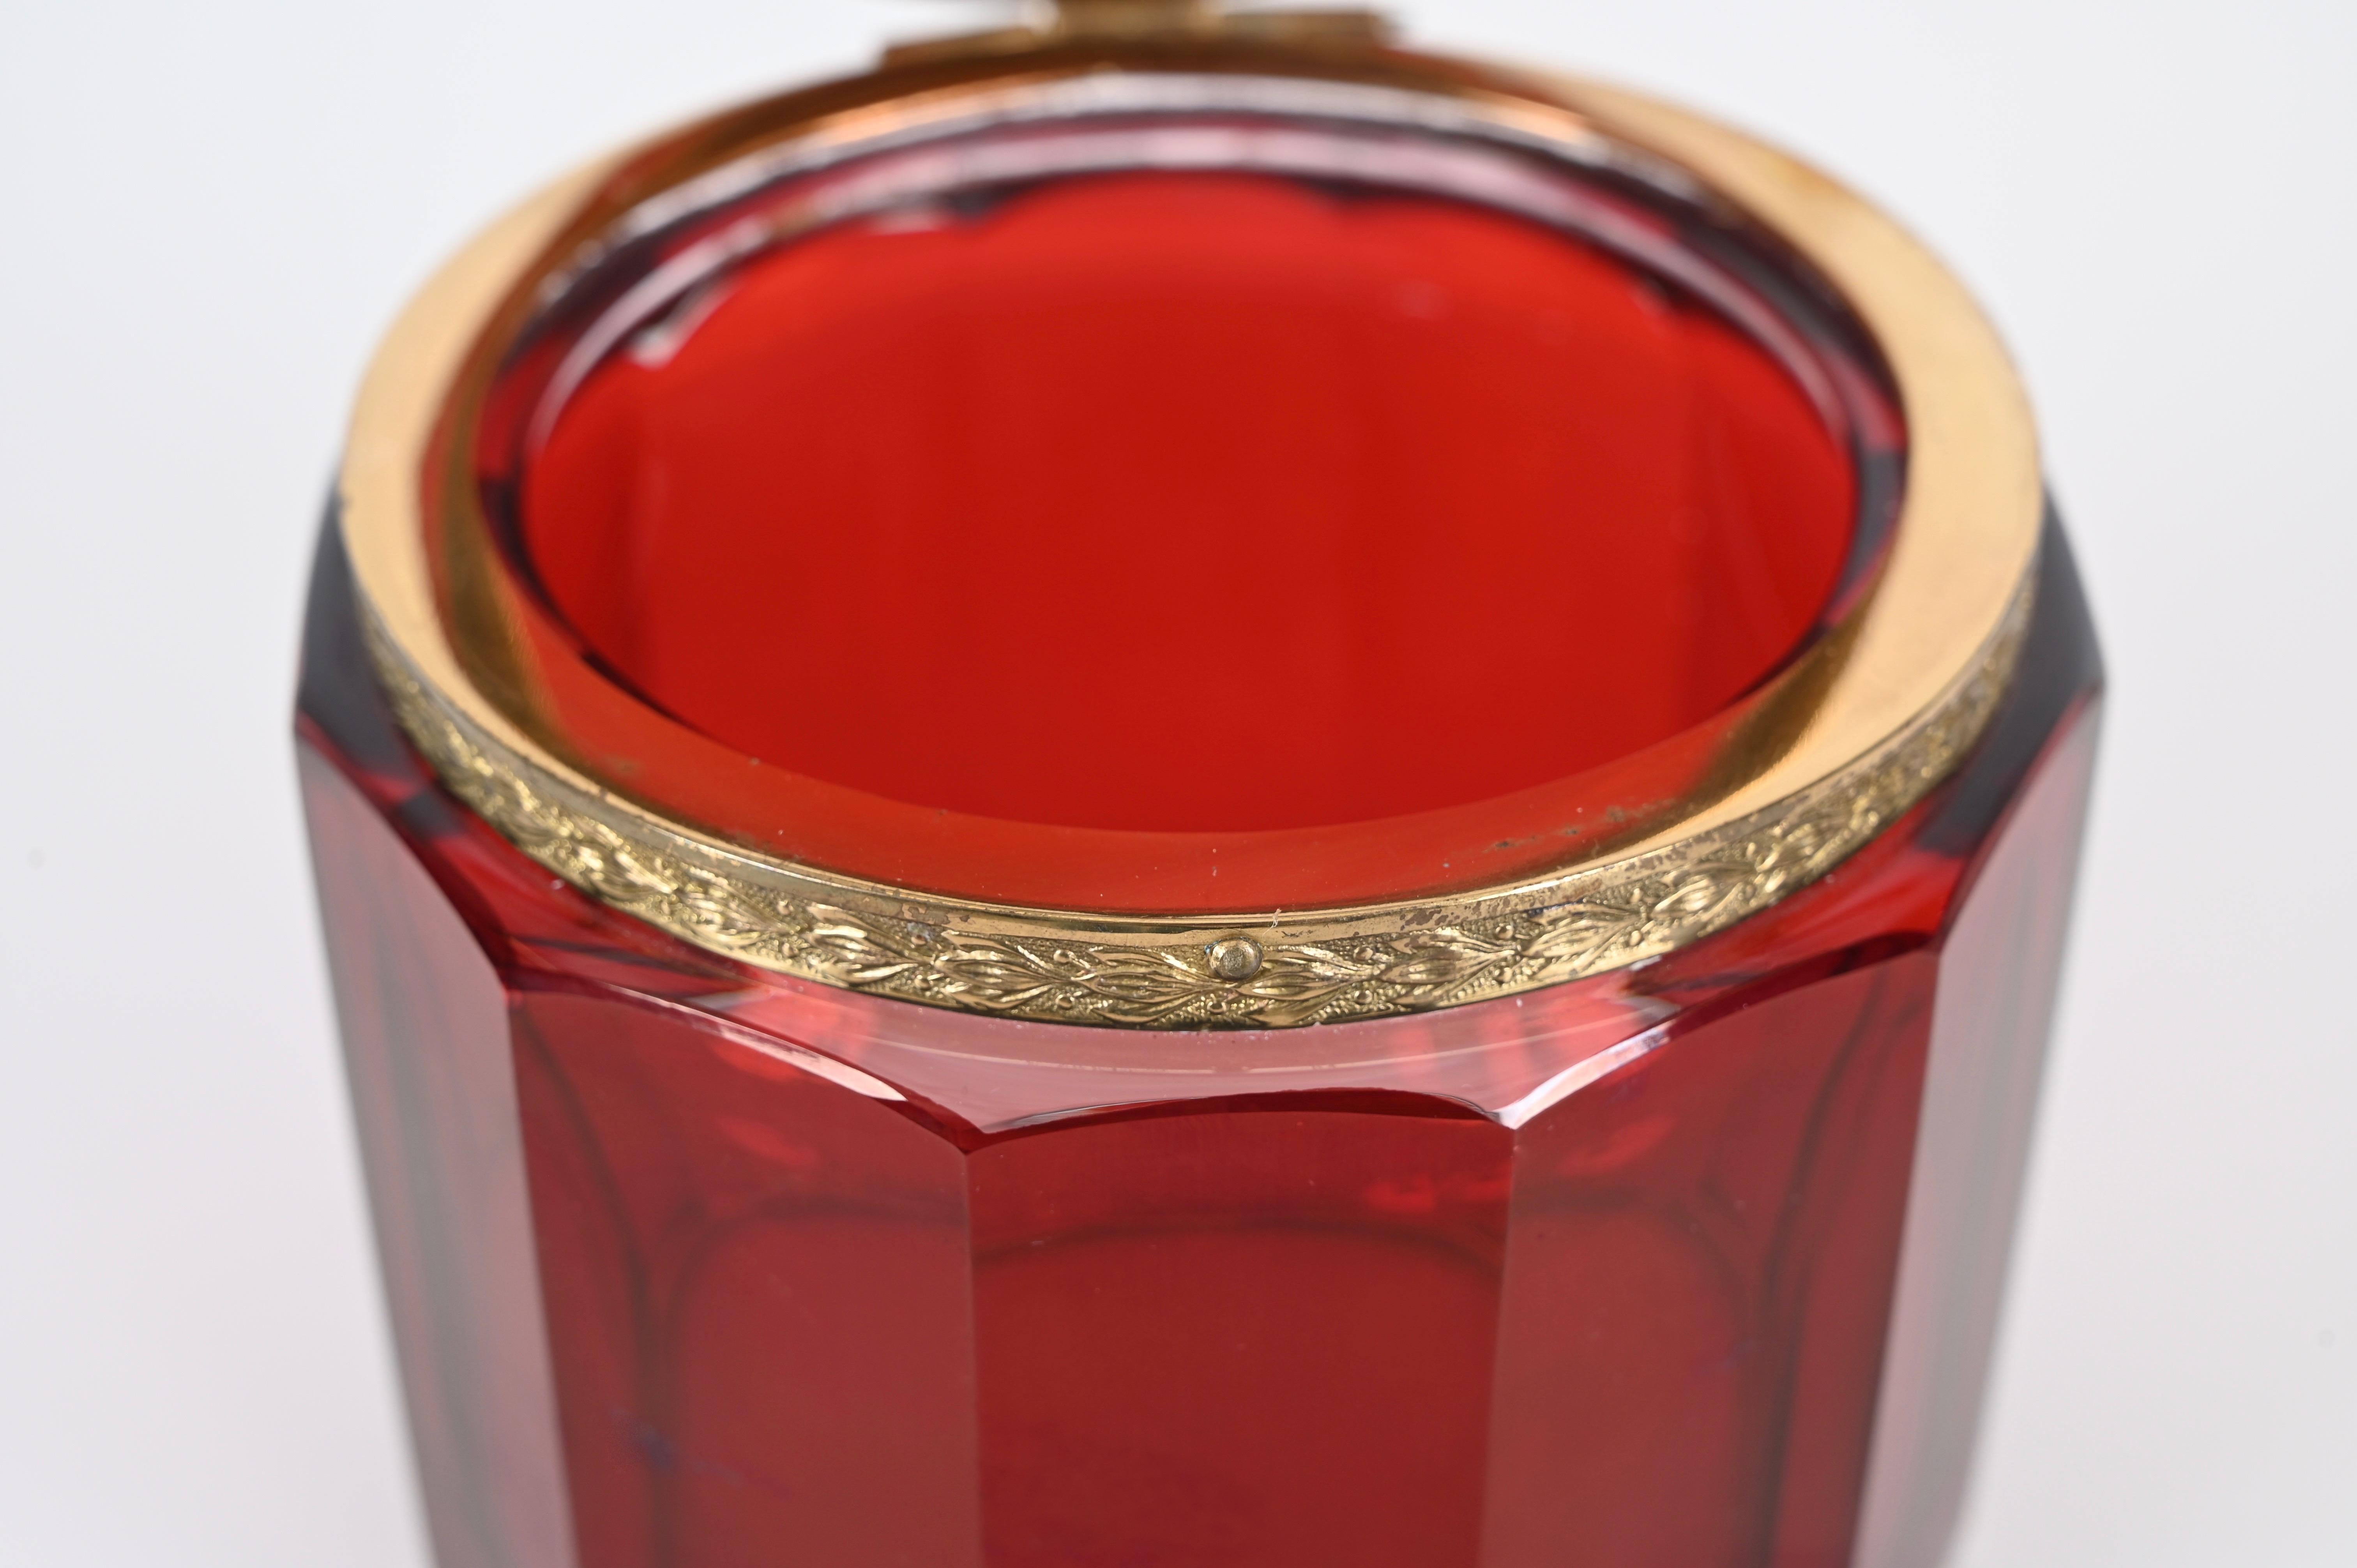 Ruby Red and Gilt Silver Faceted Murano Glass Jewelry Box, Italy 1920s For Sale 5